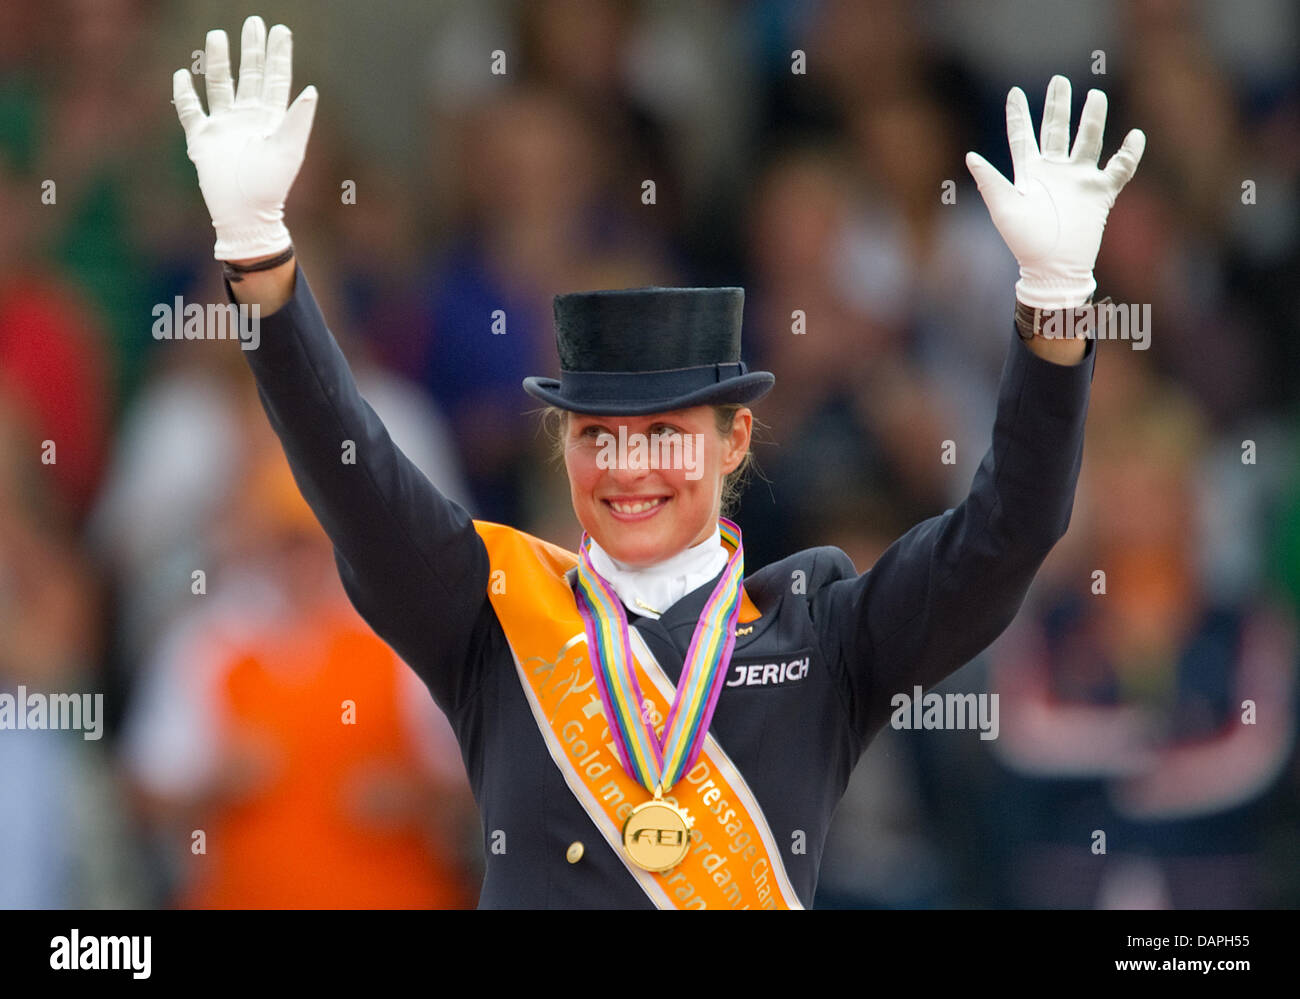 Dutch Adelinde Cornelissen waves and smiles during the award ceremony of the Grand Prix Special at the European Dressage Championship in Rotterdam, Netherlands, 20 August 2011. Cornelissen took first place. Photo: Uwe Anspach Stock Photo